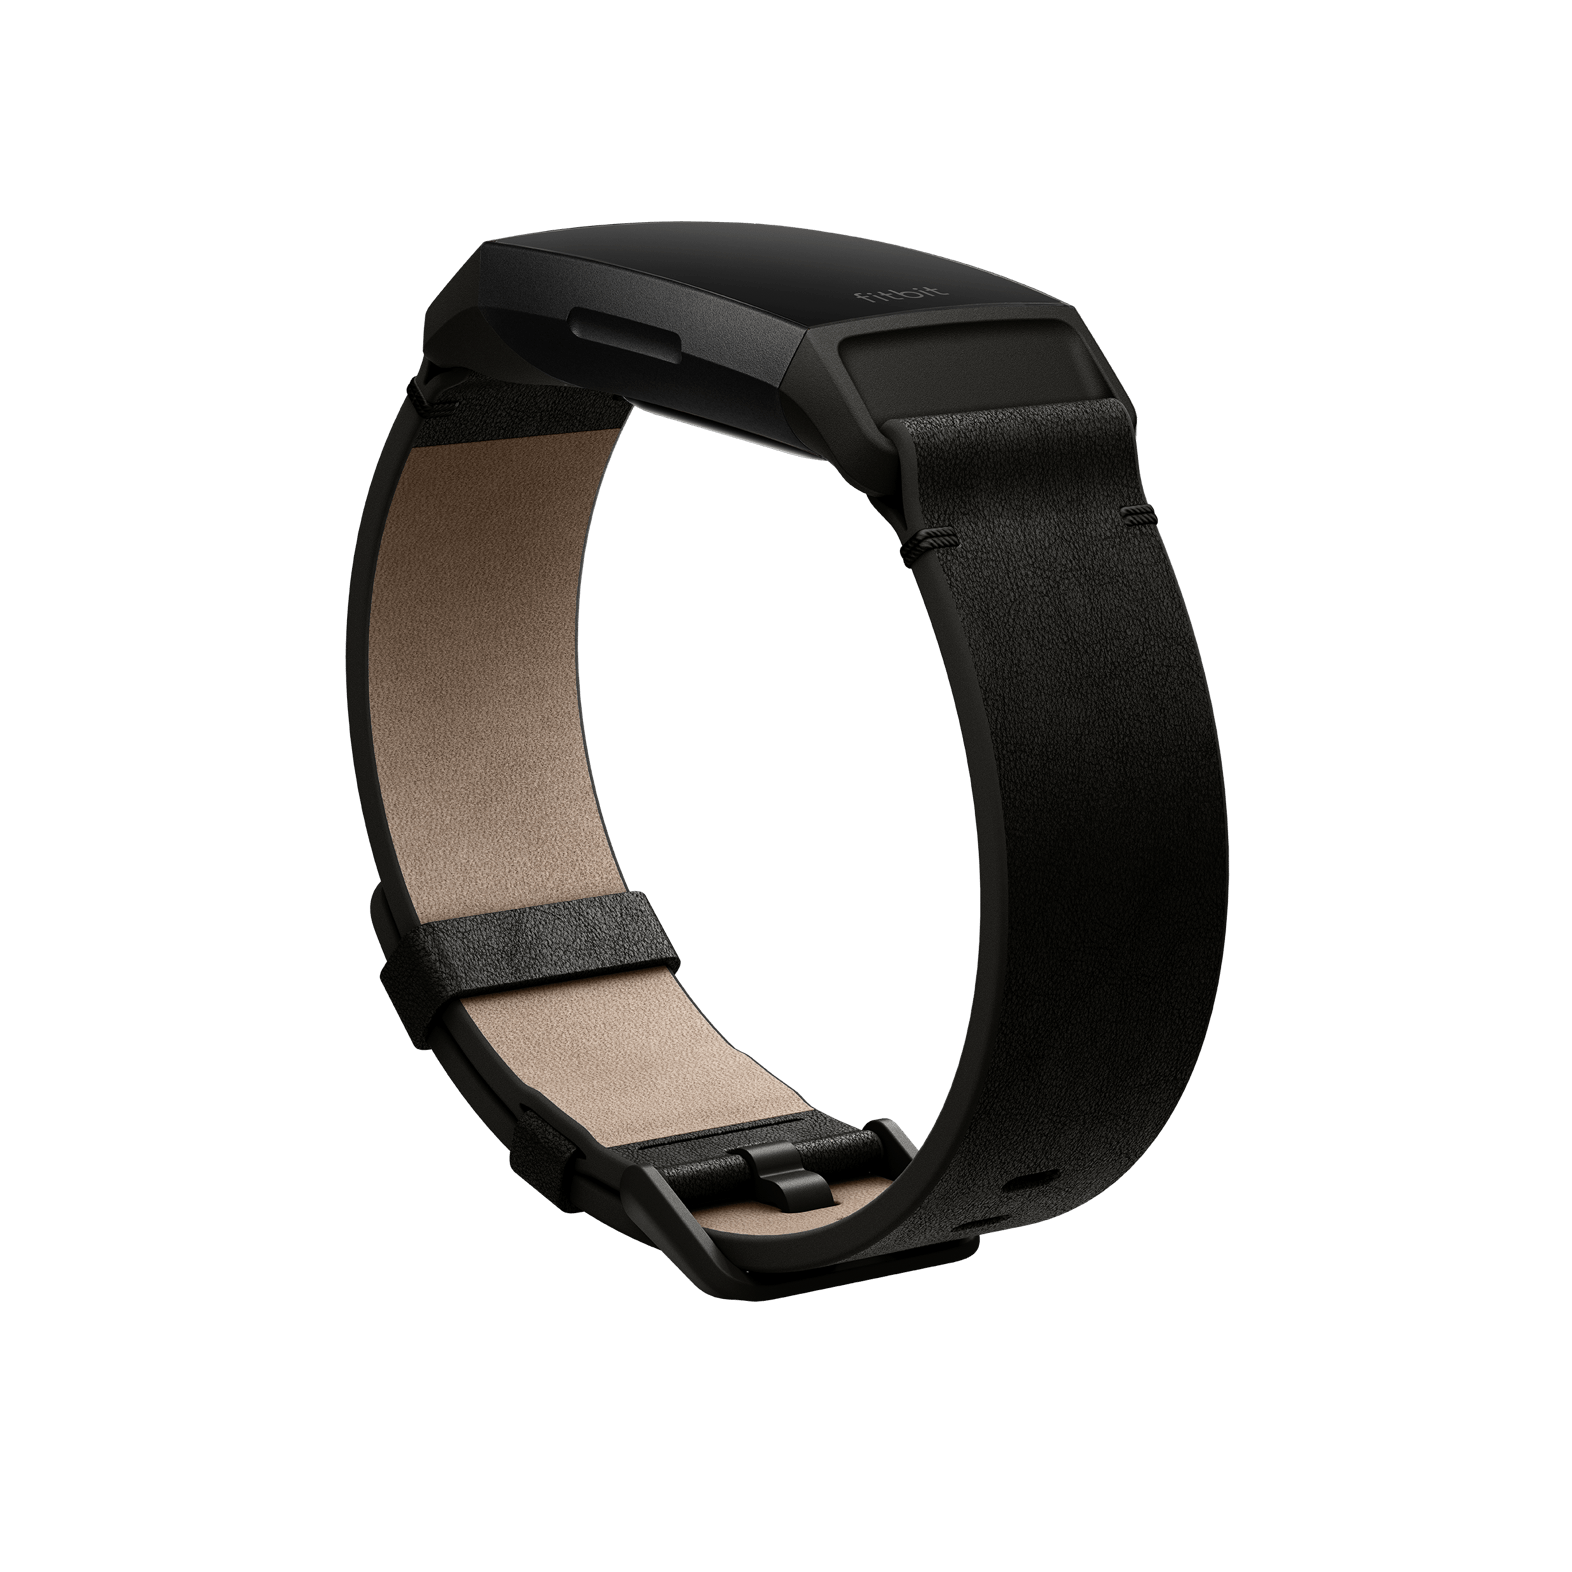 fitbit charge 3 bands canada